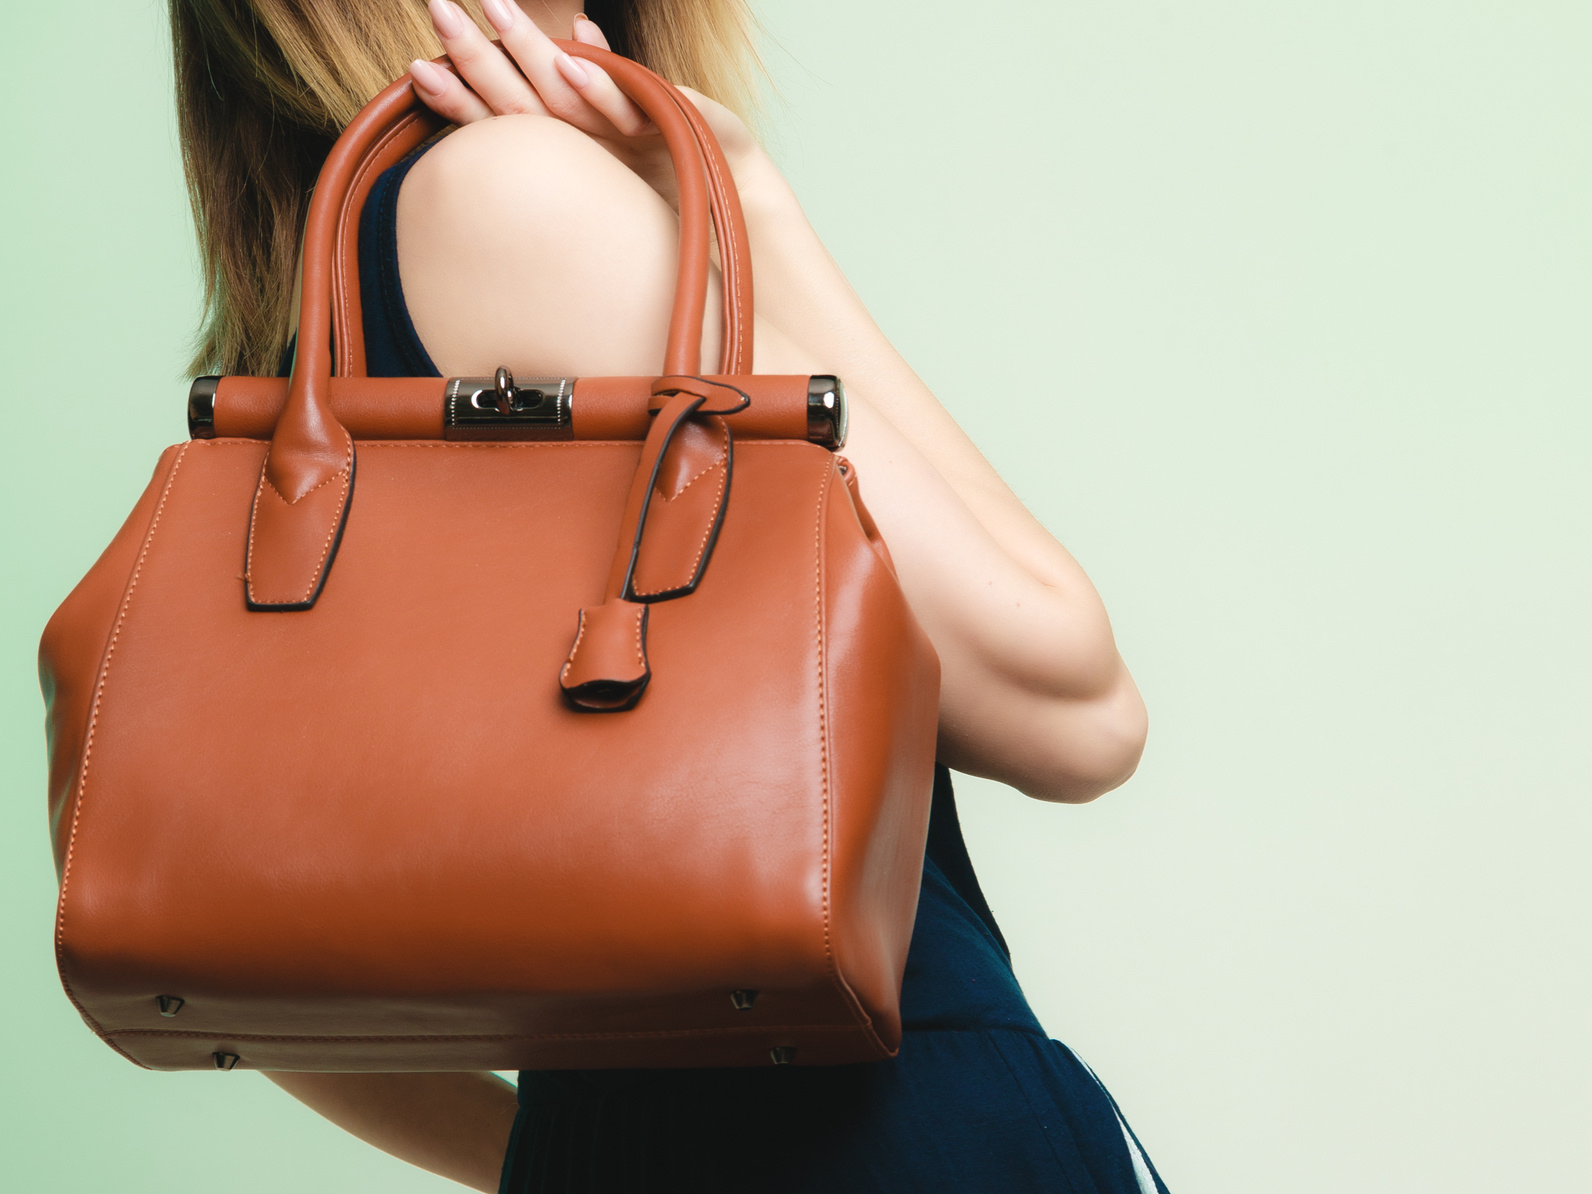 Types of Bags Every Woman Should Own